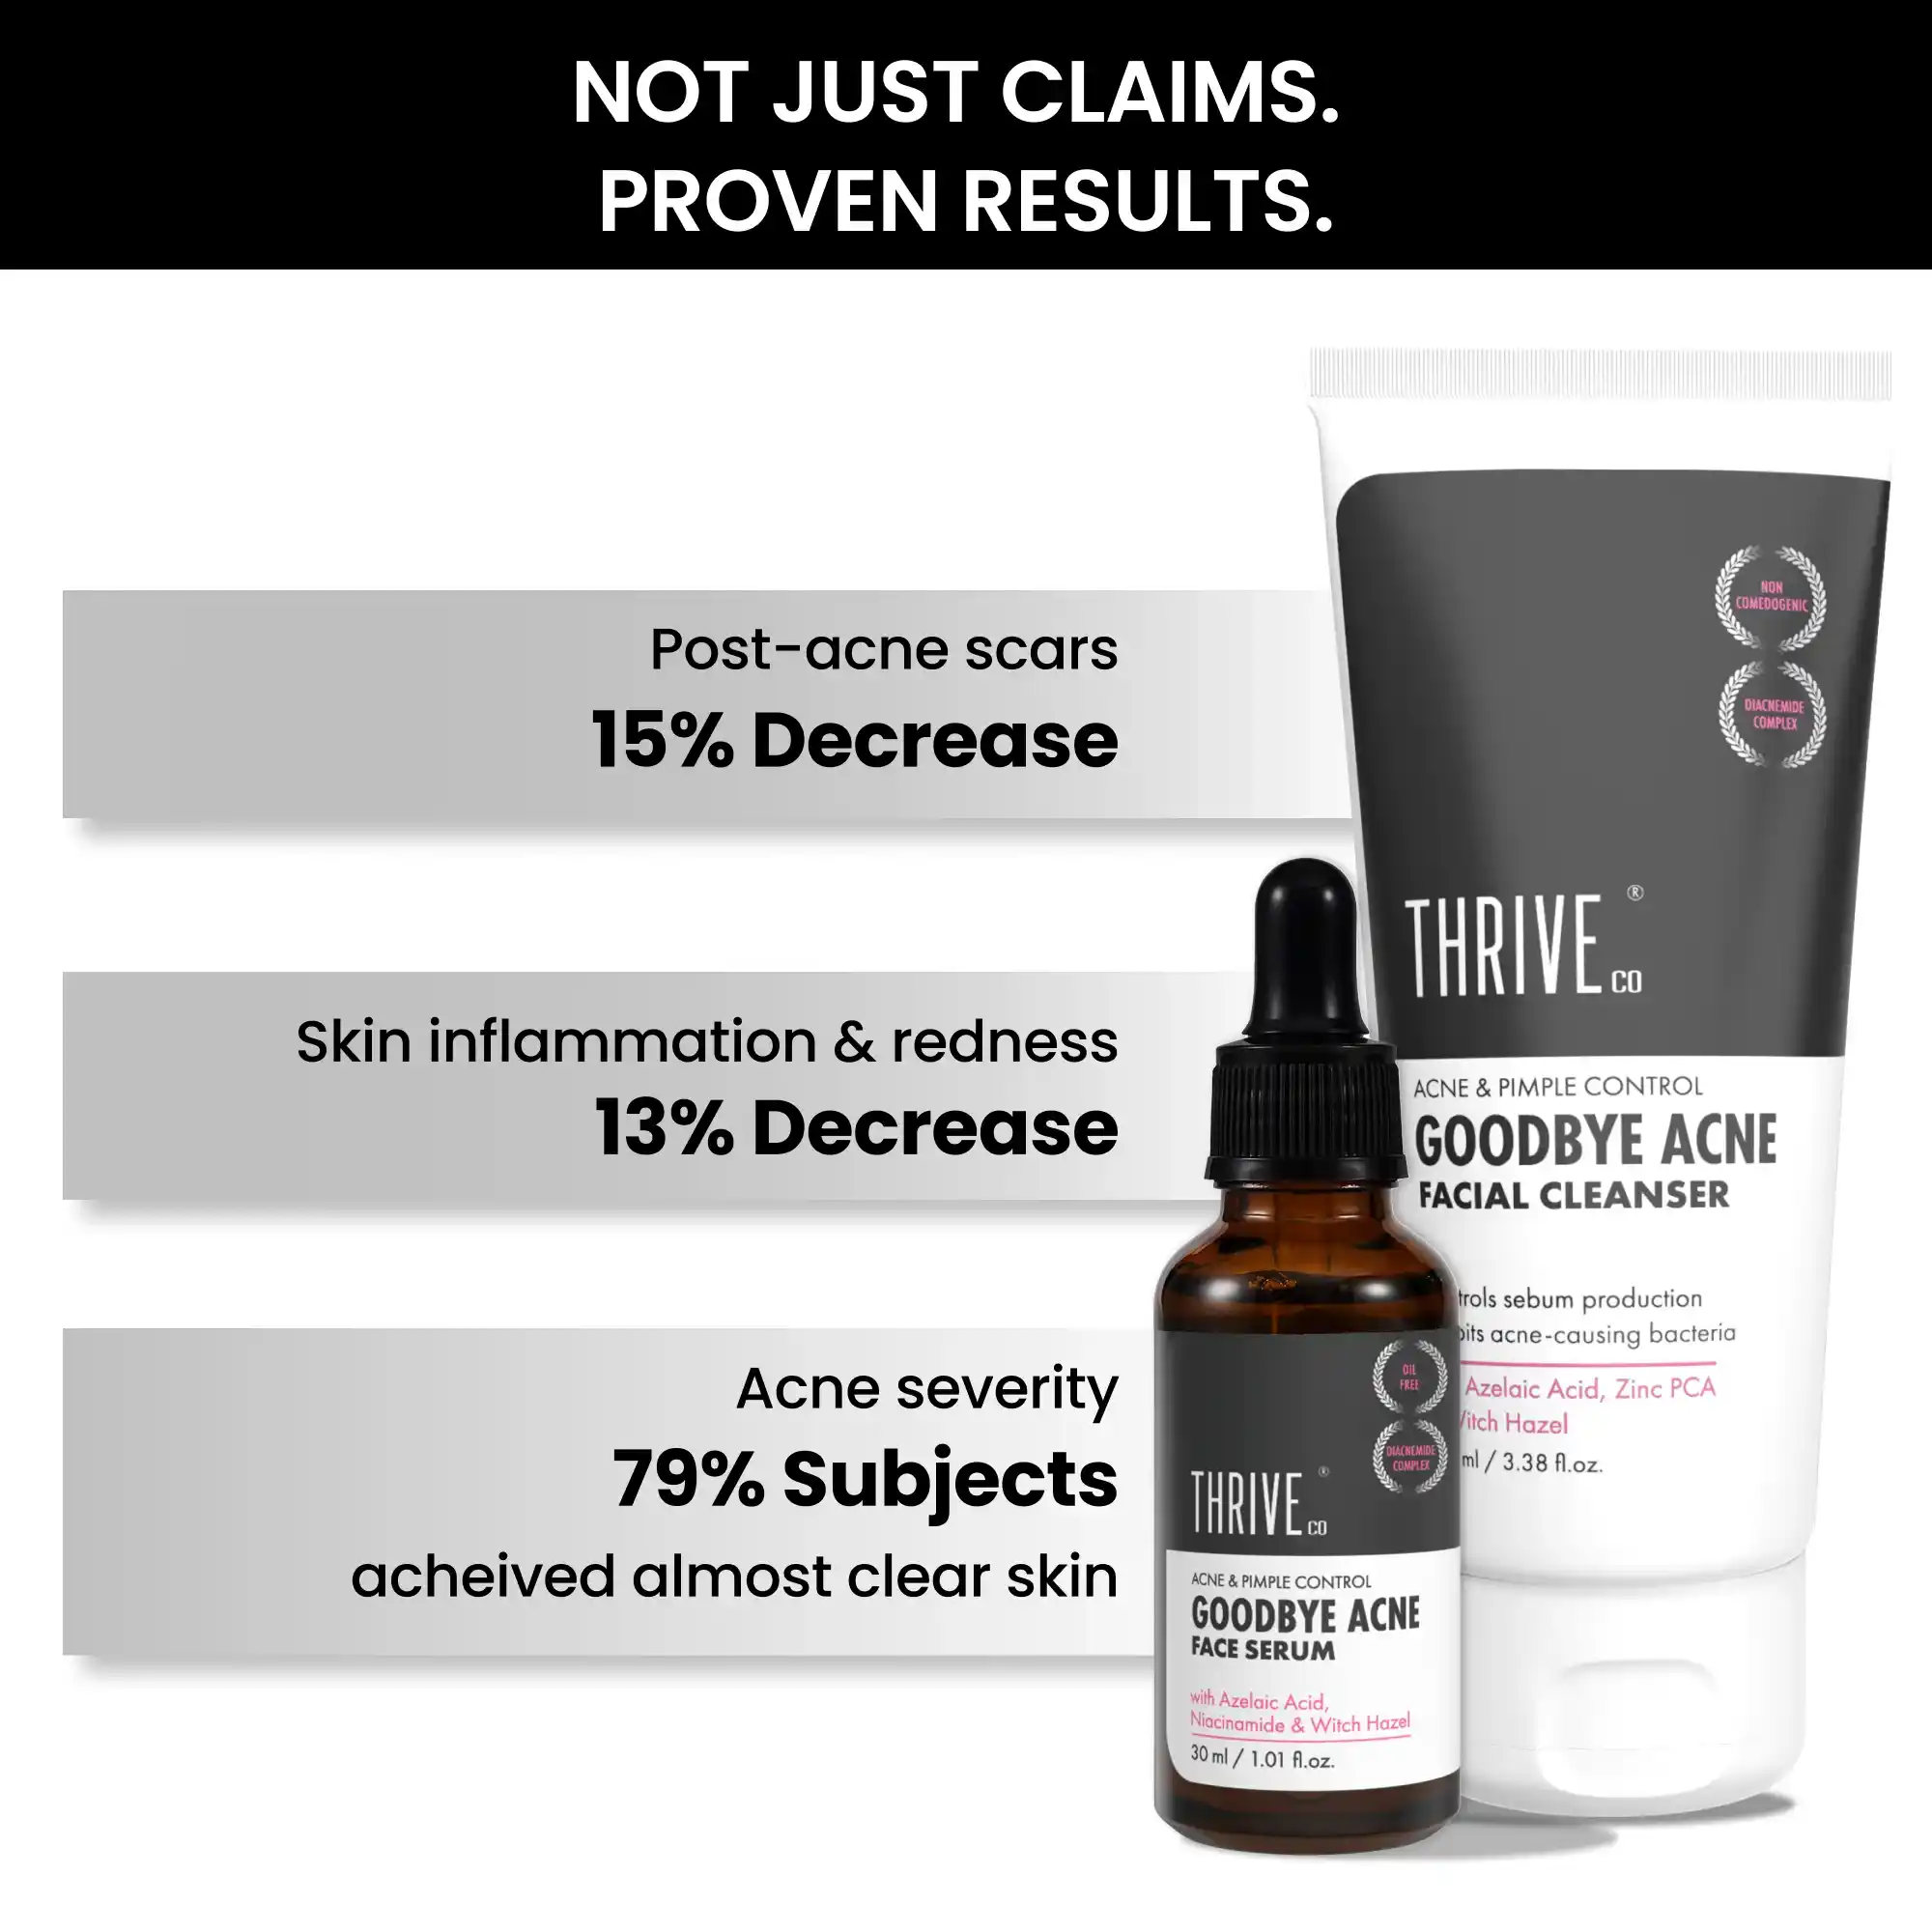 Not just claims, ThriveCo Goodbye Acne Kit also gives proven results